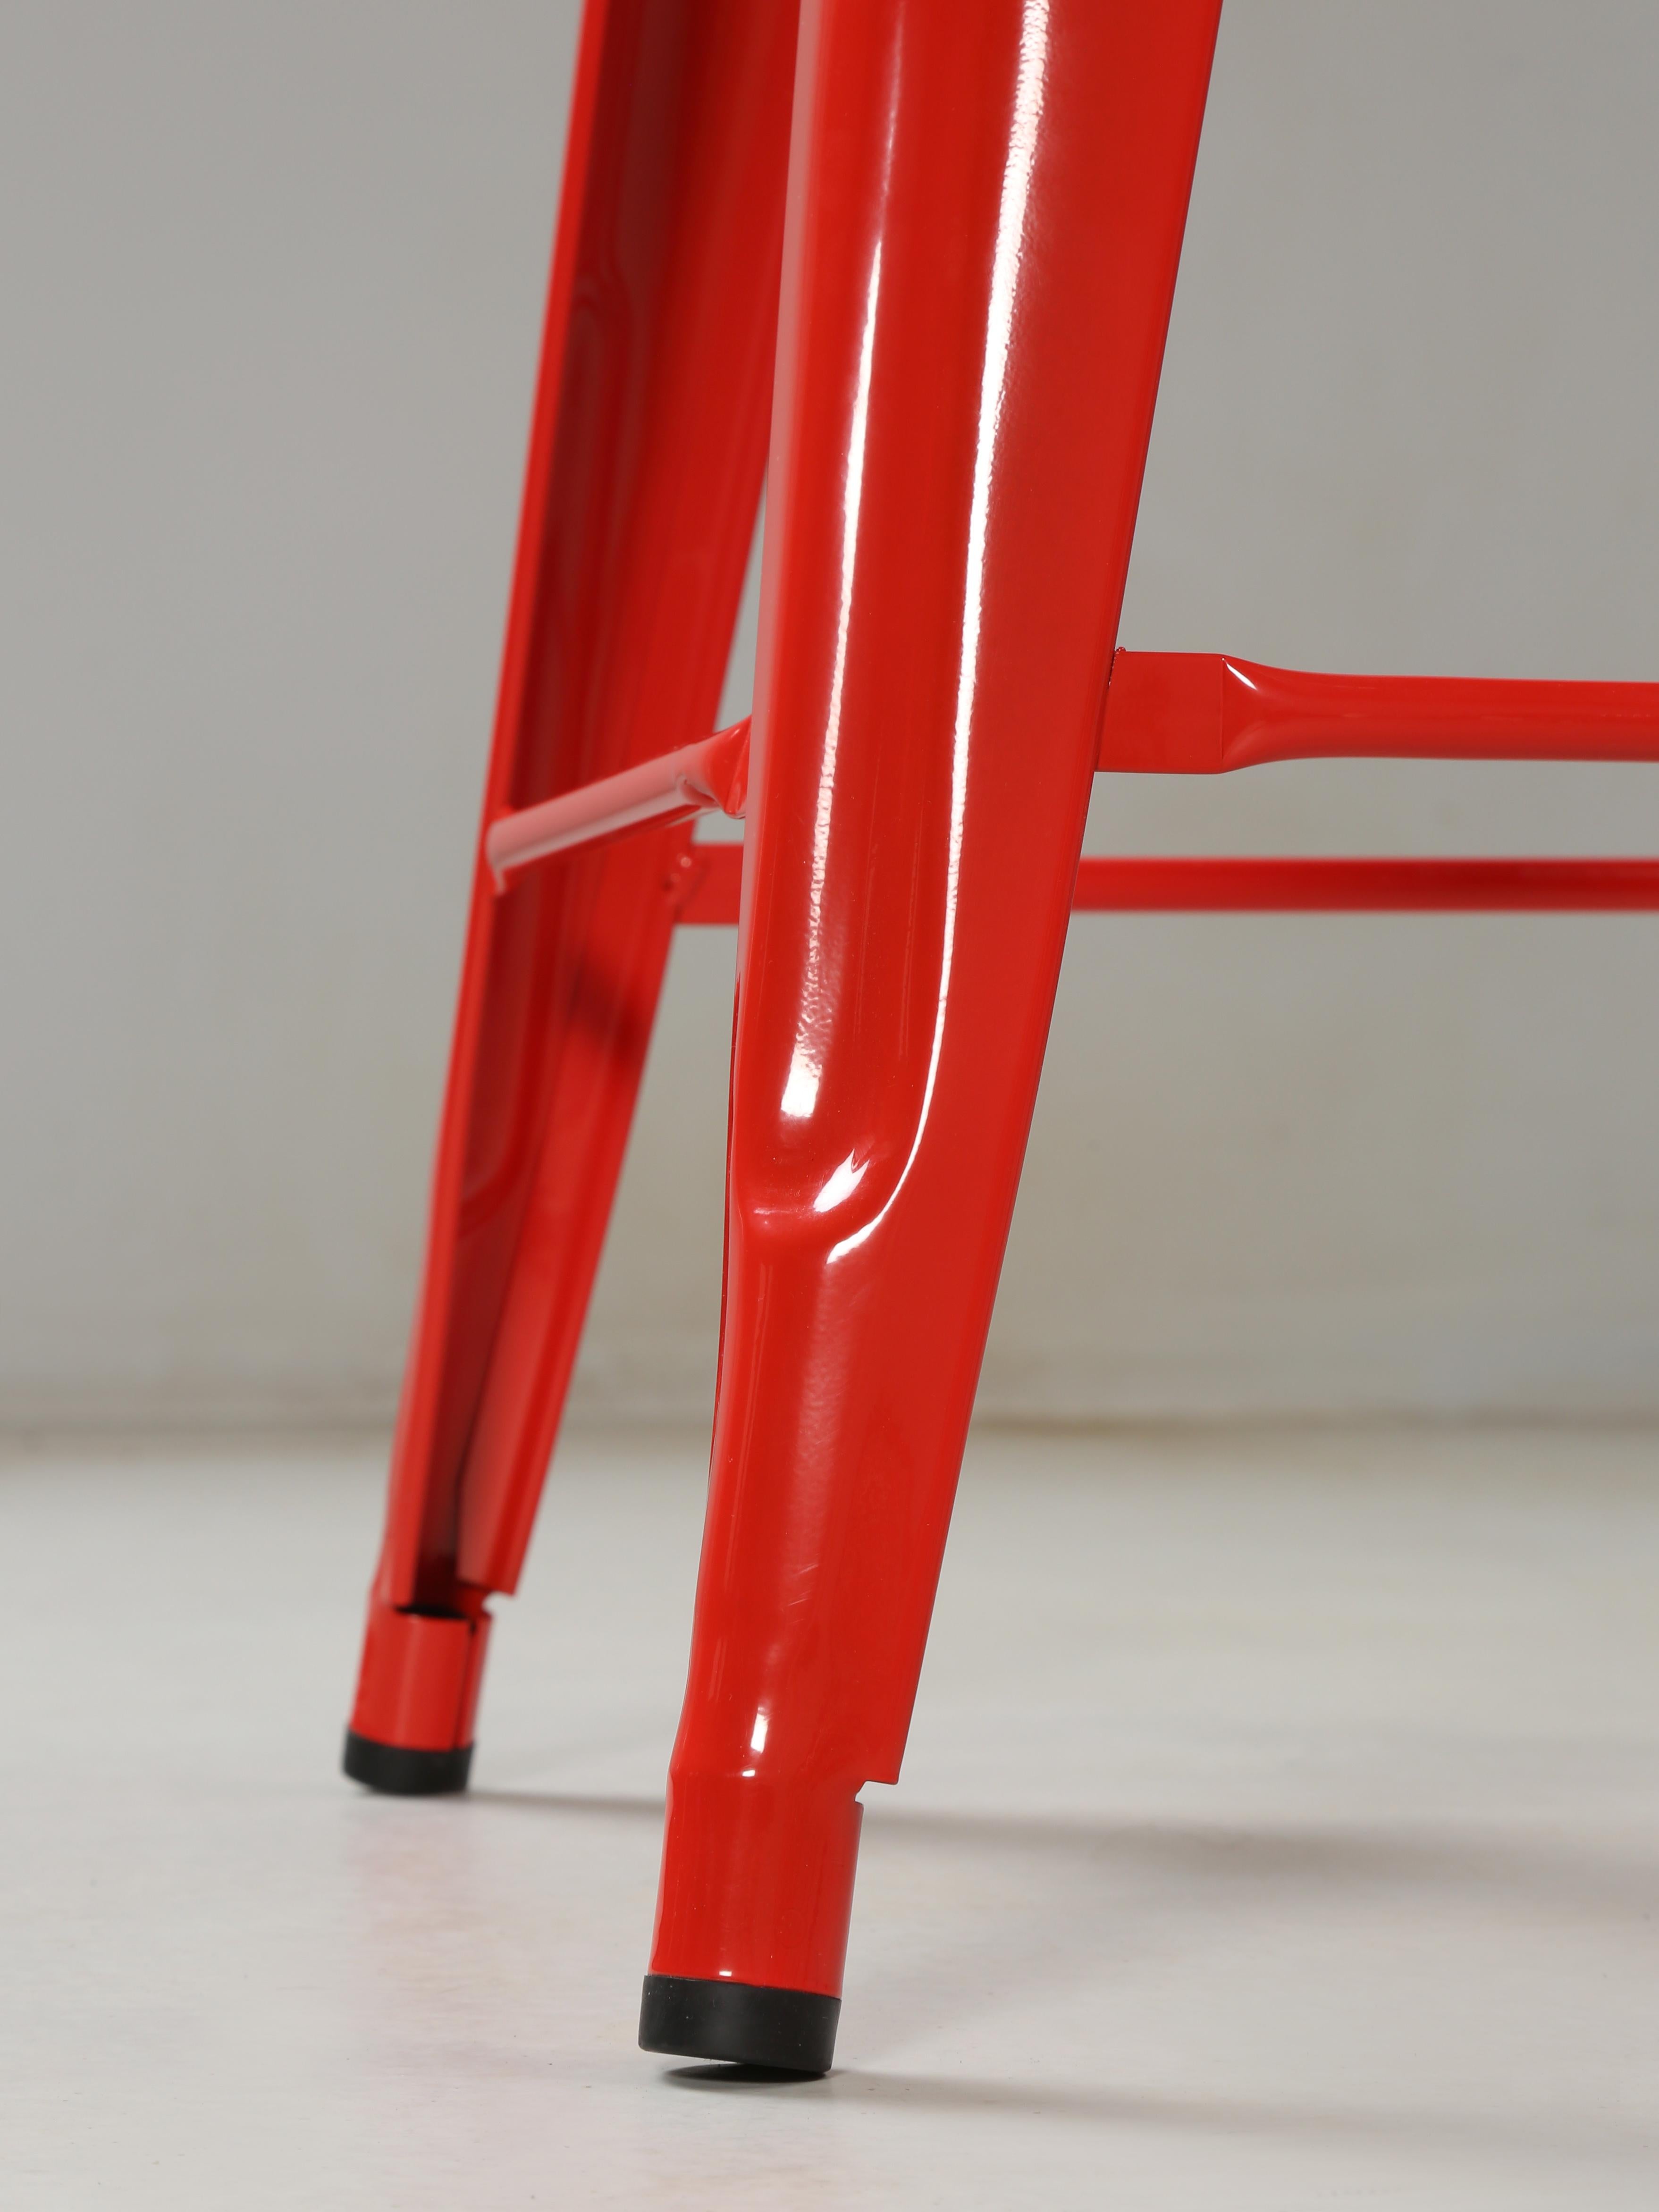 Industrial Genuine Tolix Stacking Stools 100's Showroom Samples to Choose from Most Colors For Sale